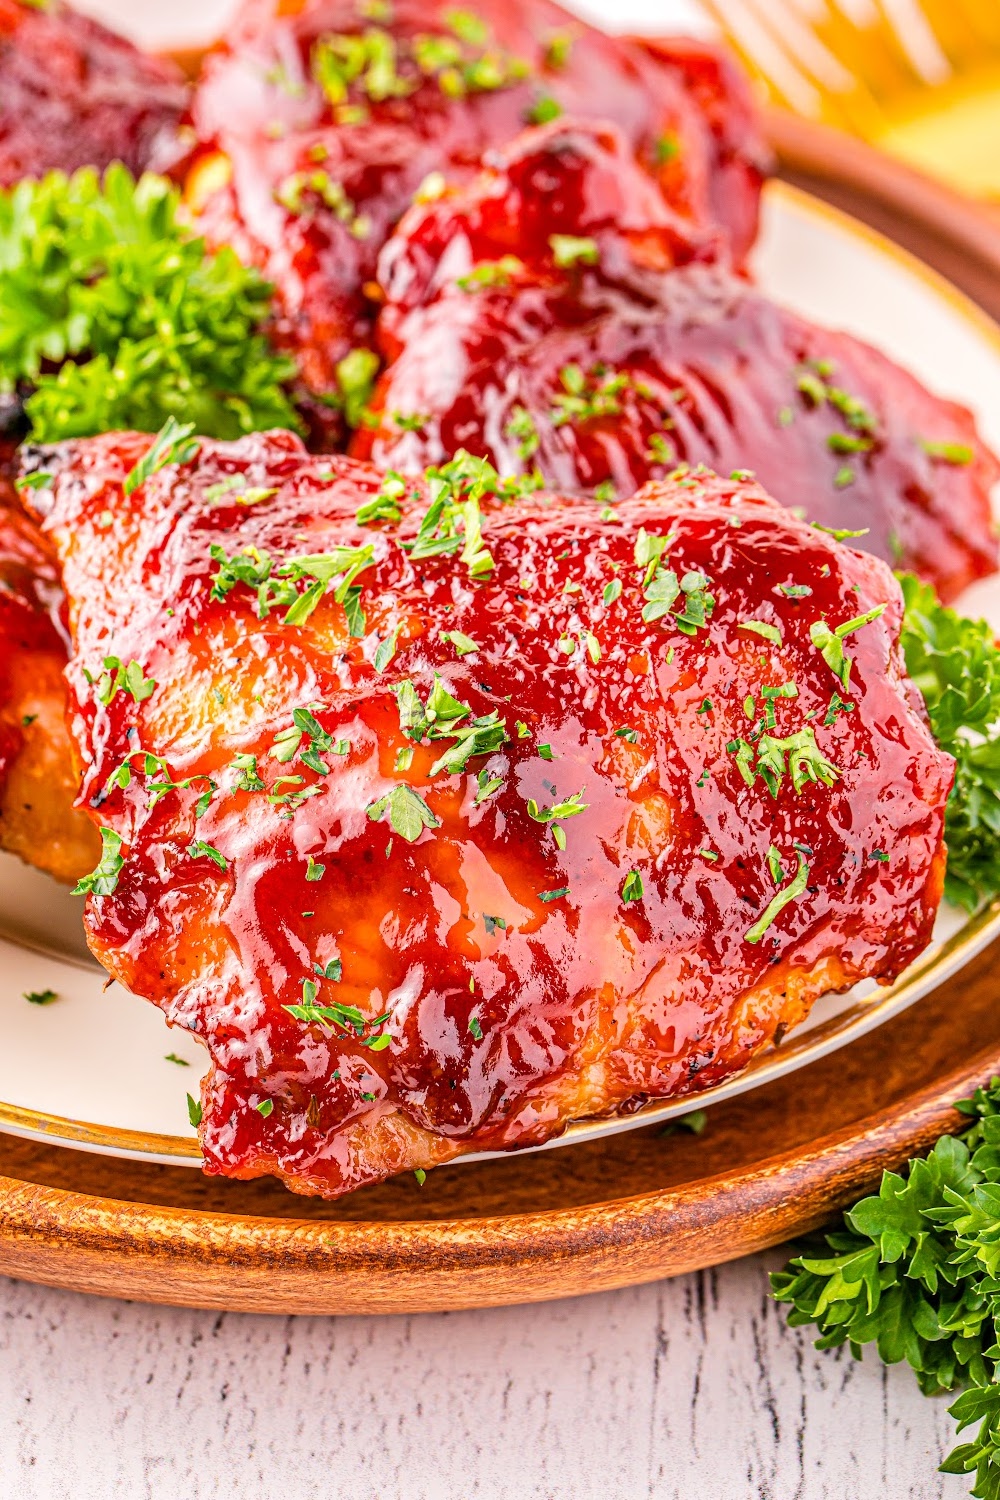 Baked BBQ Chicken Thigh garnished with parsley on a white dinner plate.